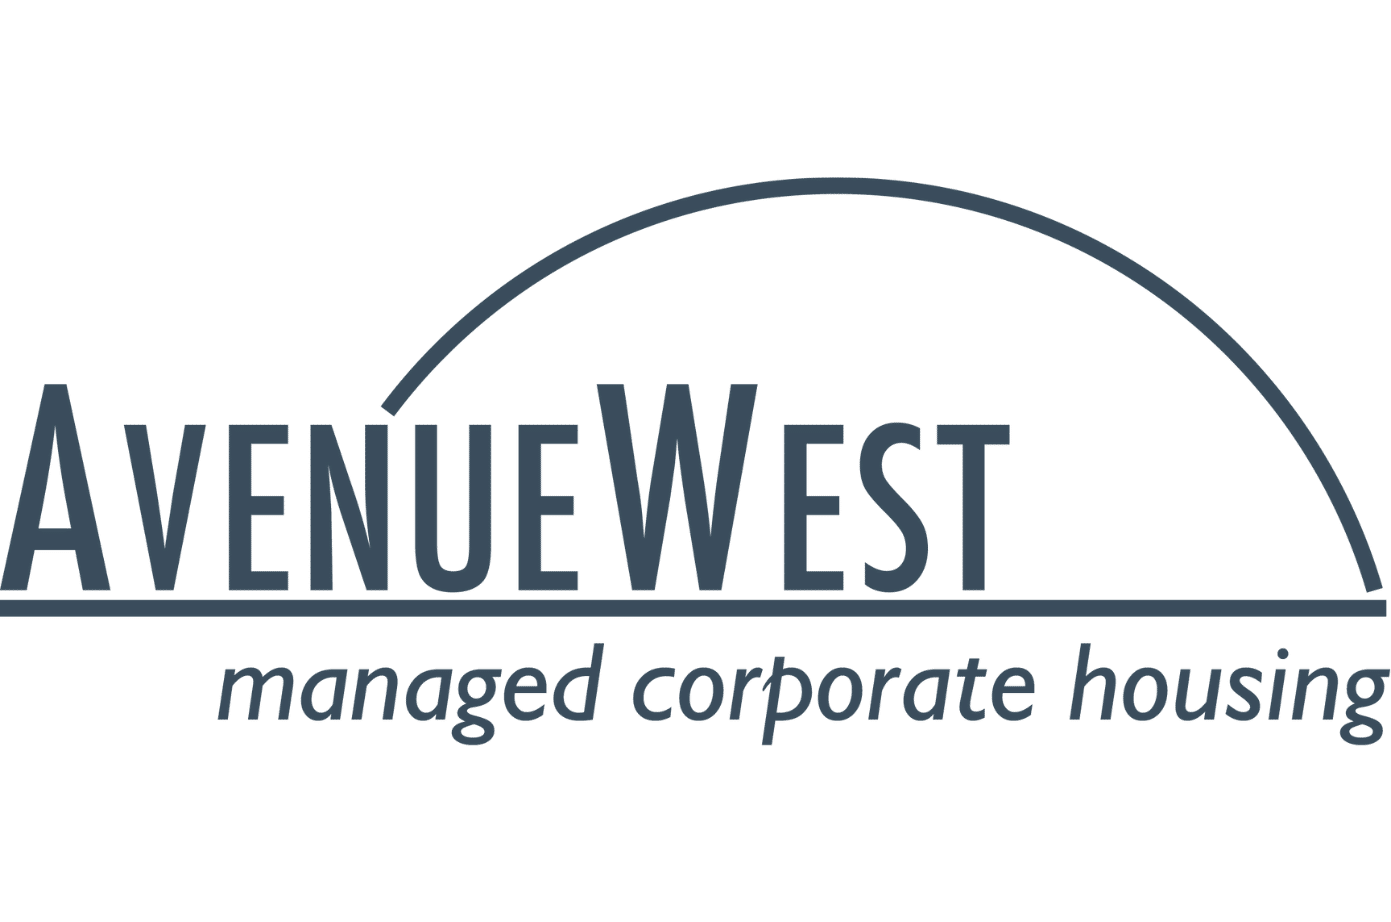 AvenueWest Celebrates 25 Years of Unmatched Service in the Corporate Housing Industry